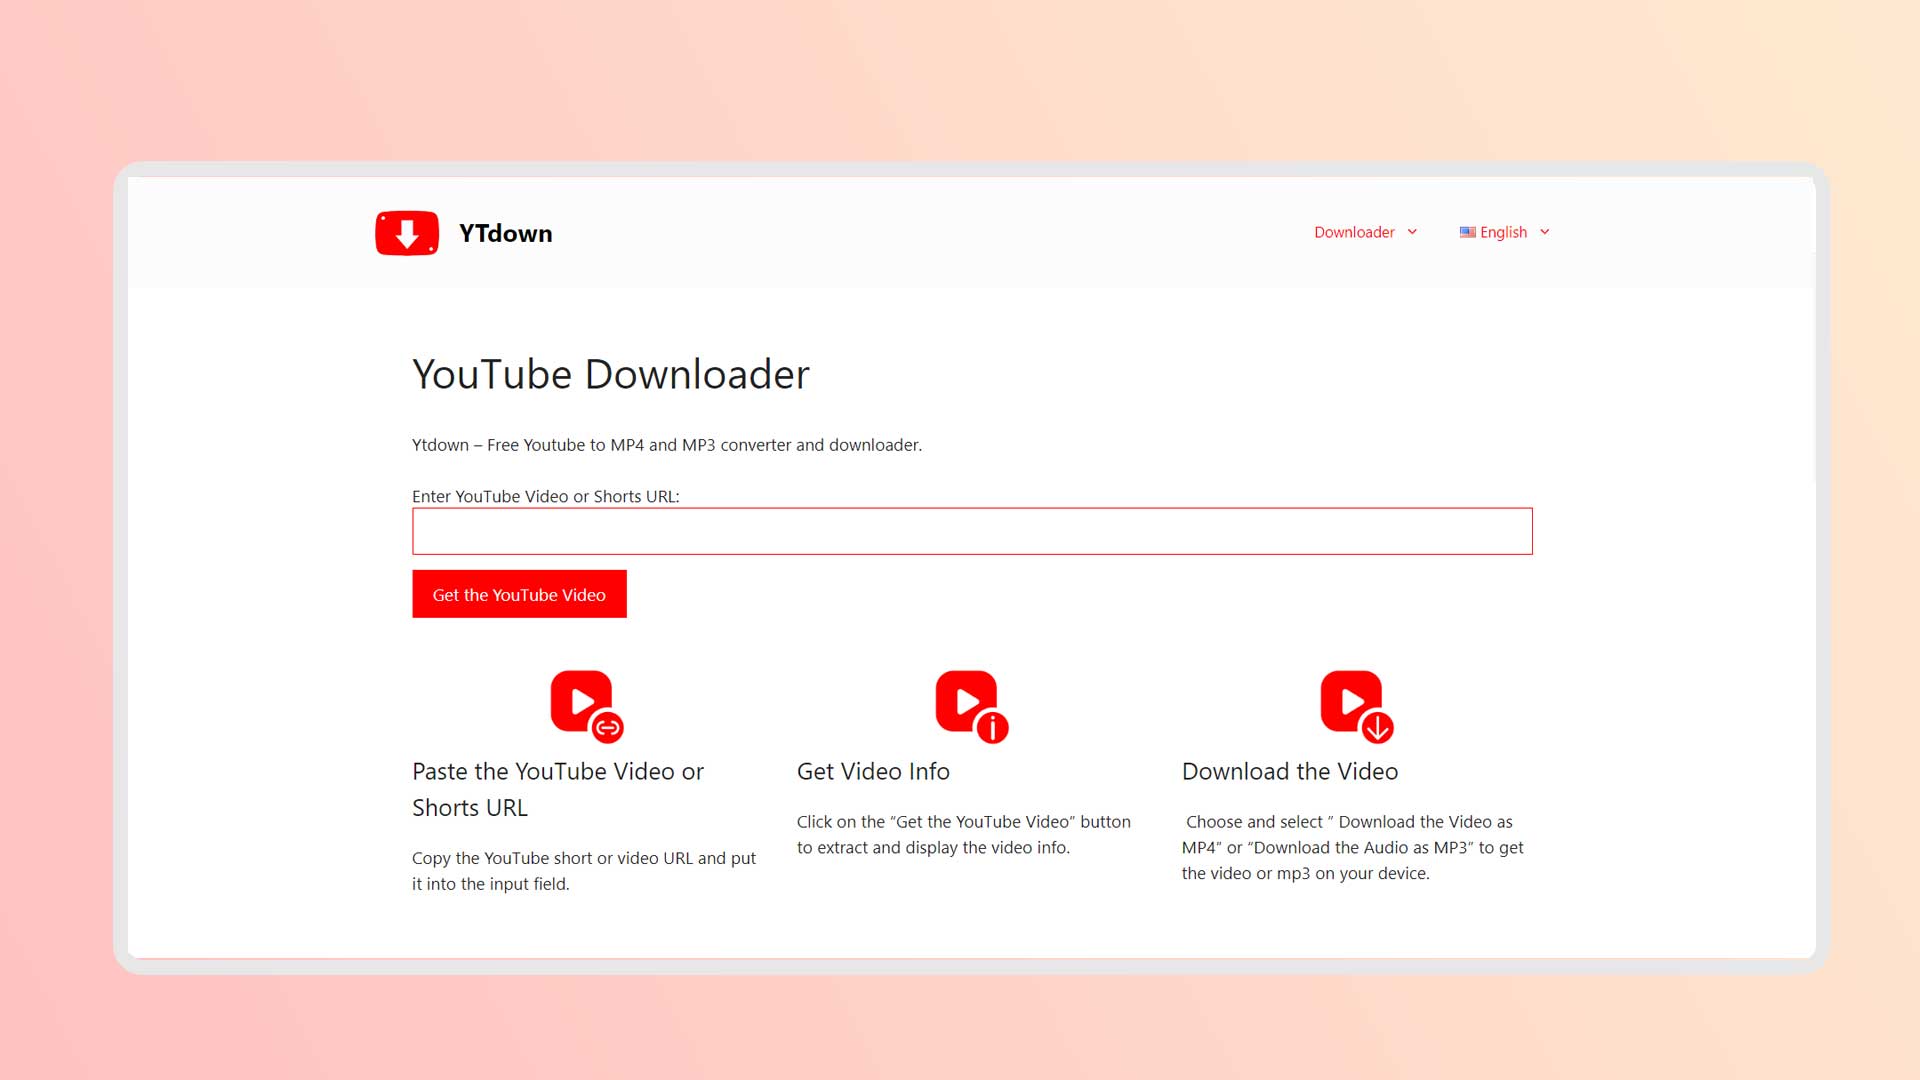 YTdown Ytdown - YouTube Video and Audio Downloader